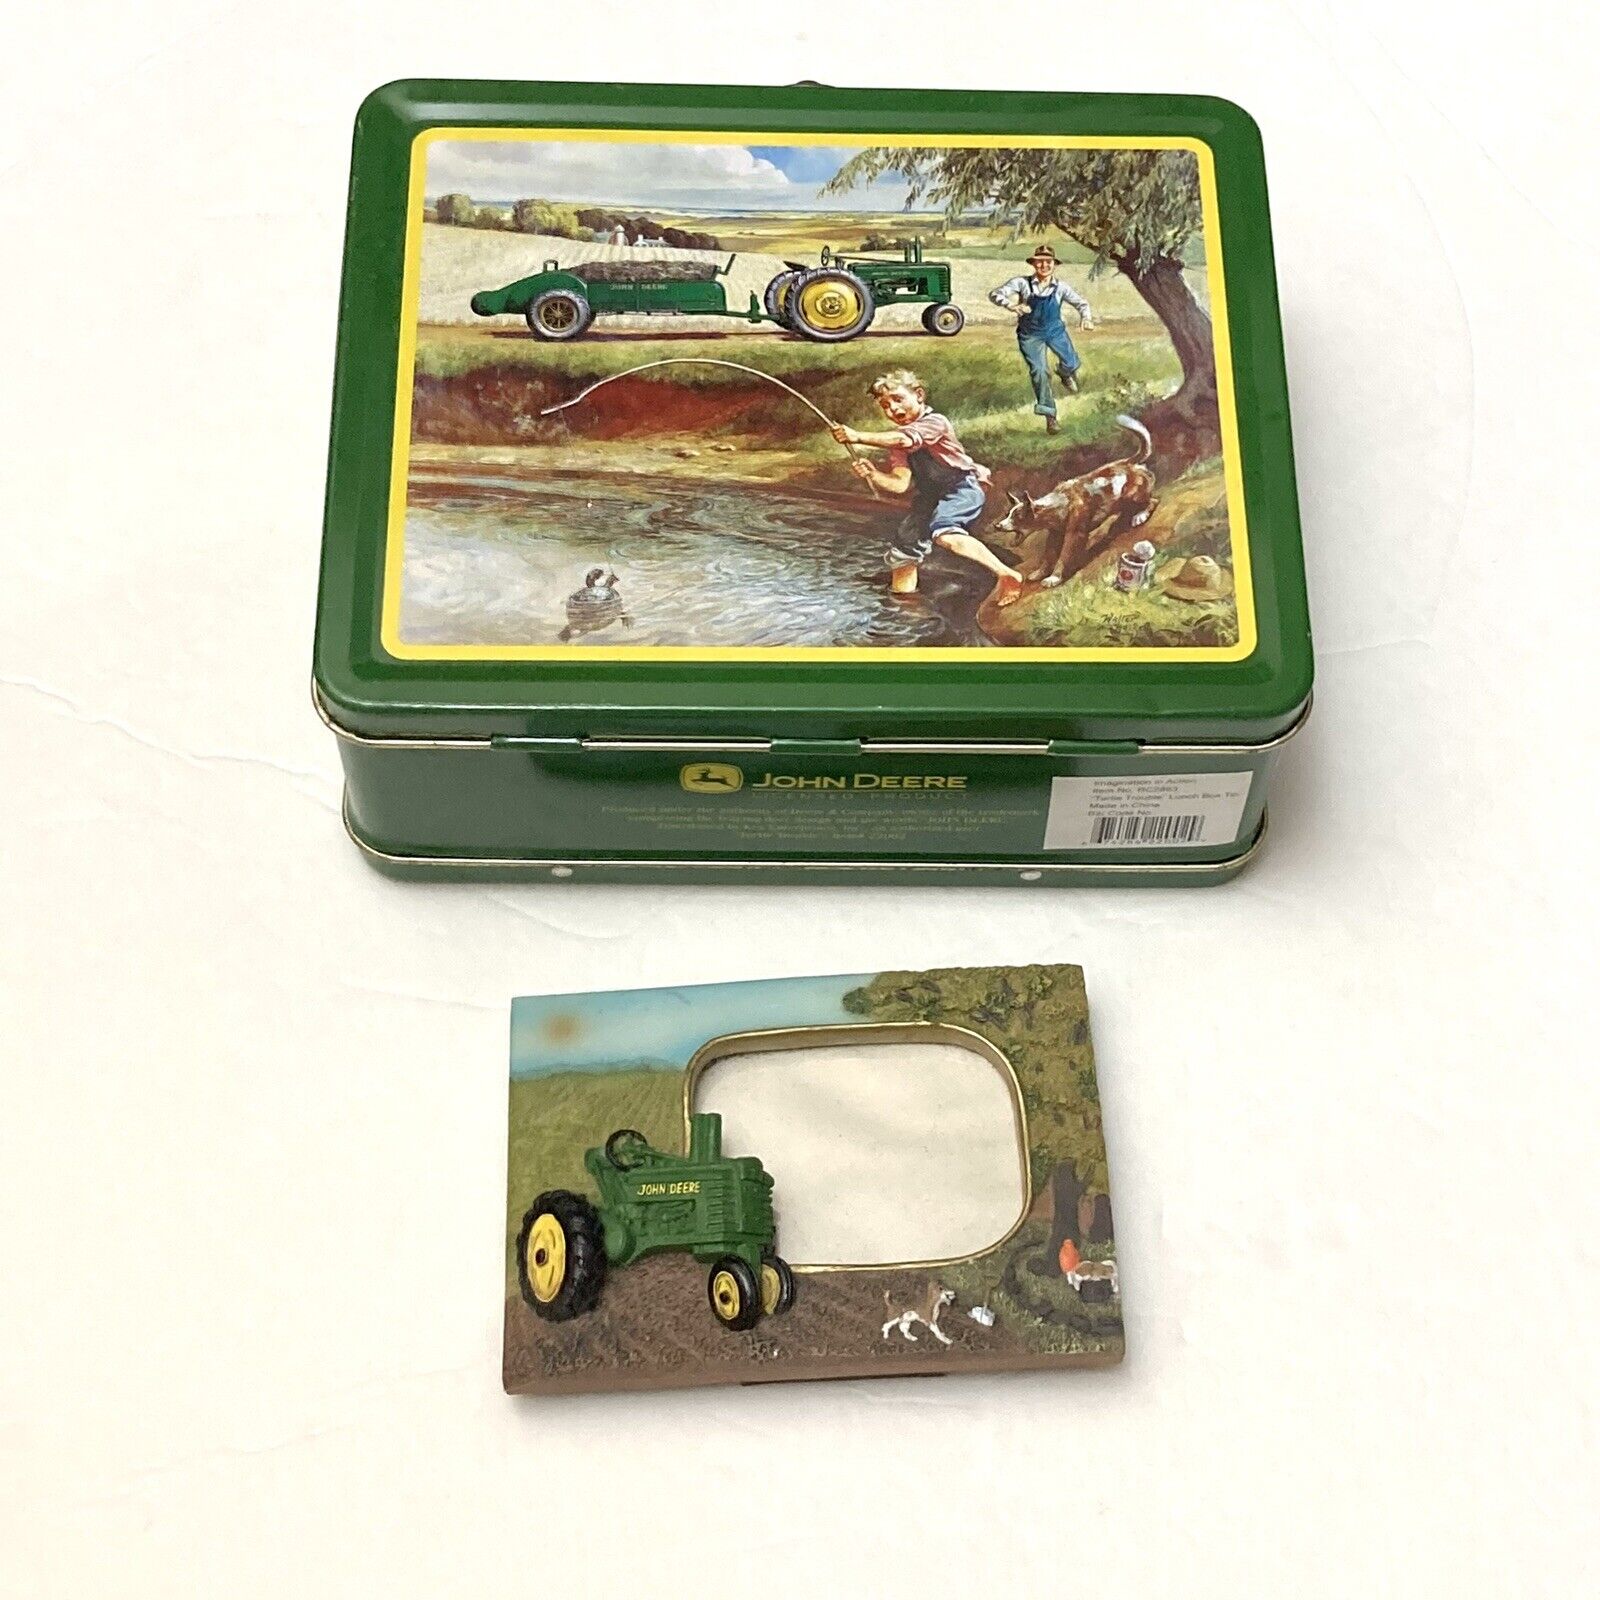 Vintage JOHN DEERE Kids Turtle Trouble Metal Tin LUNCH BOX and PICTURE FRAME